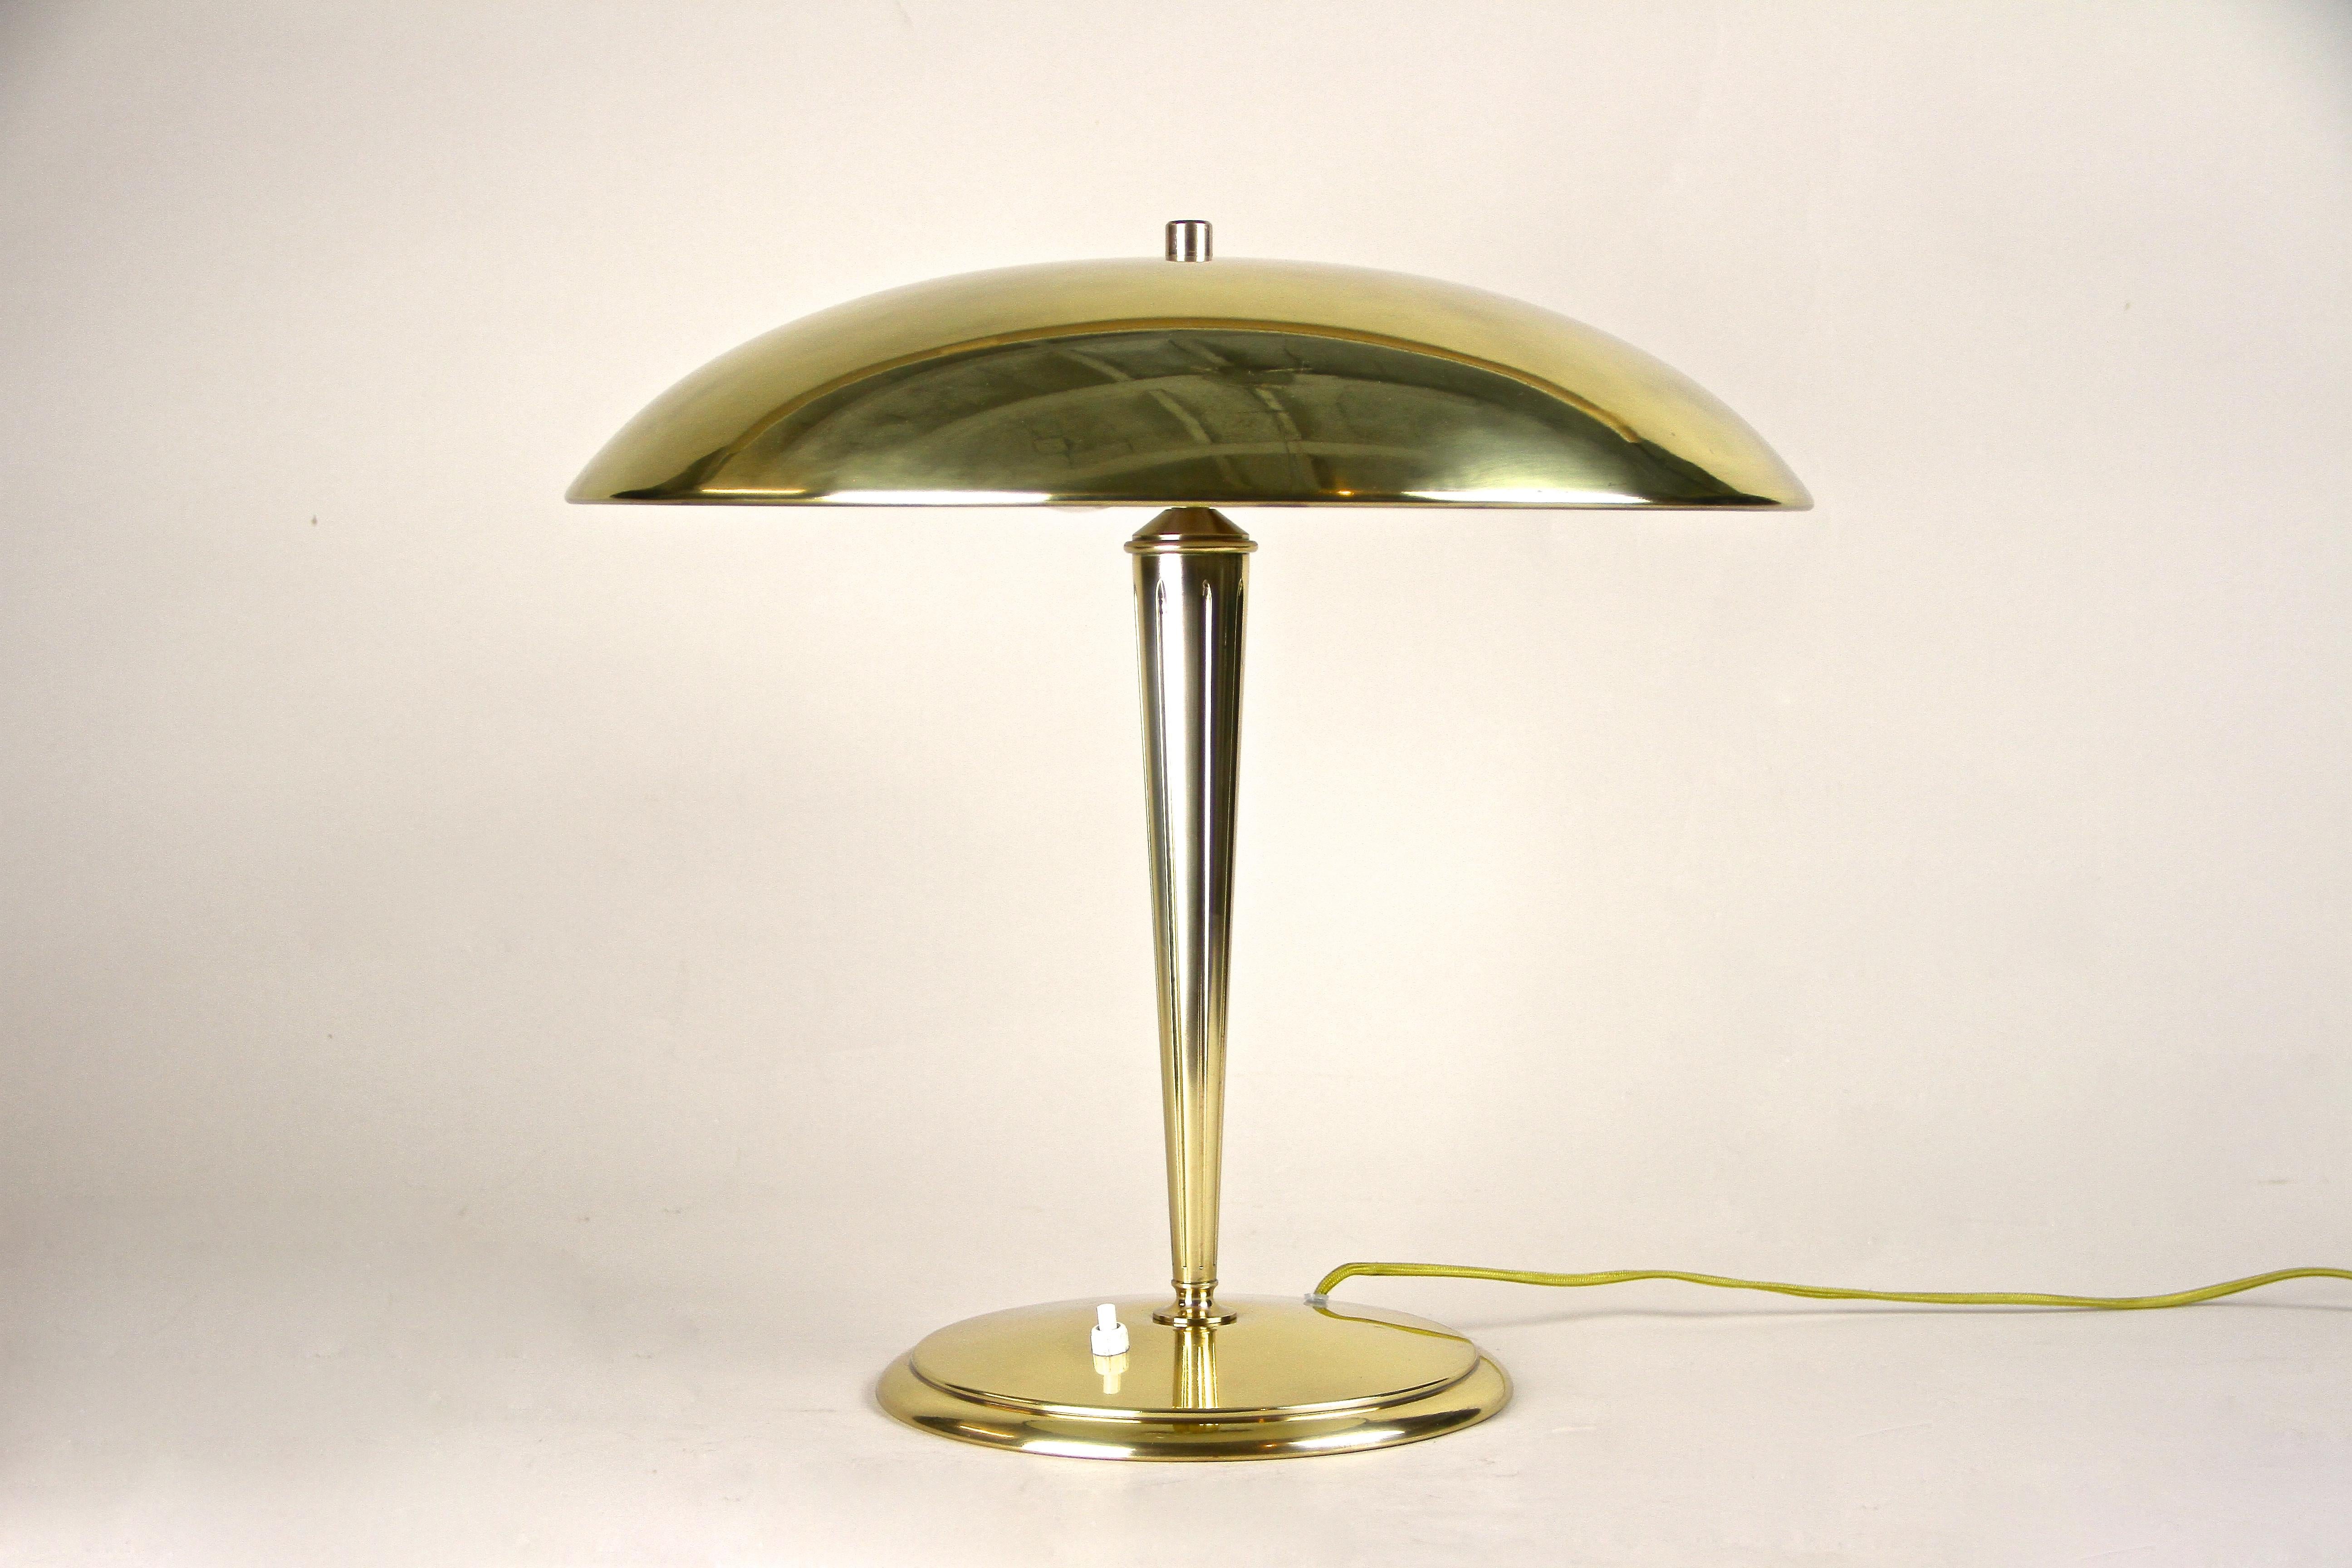 Brass table lamp from the Art Deco period in Austria around 1920. An exceptional lightning piece that comes in perfect restored condition and impressing with its absolutely outstanding design. The beautiful mushroom-shaped lampshade sits on an